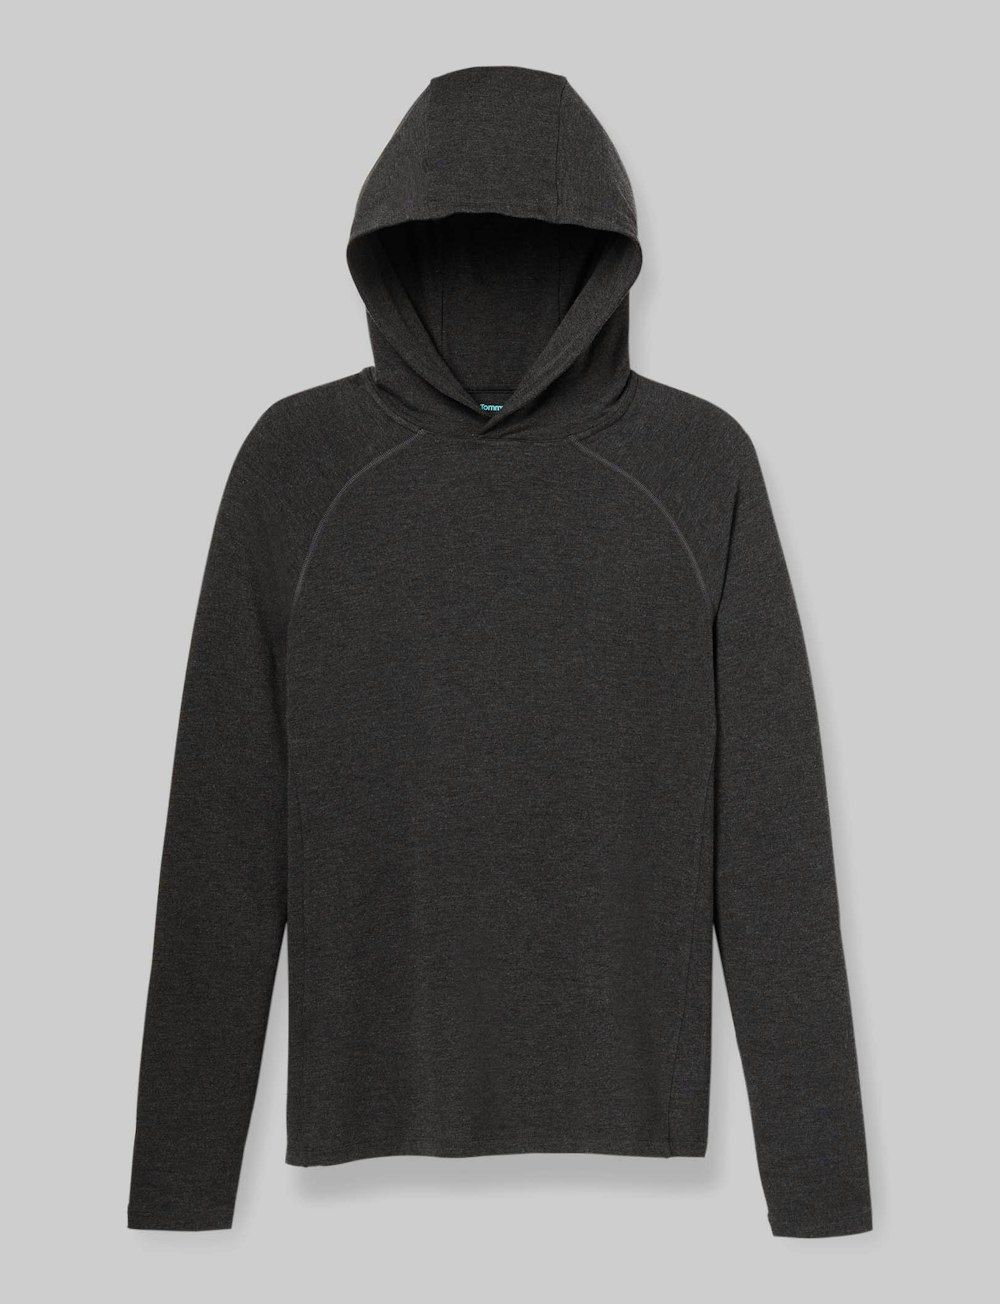 Downtime Hoodie | Tommy John